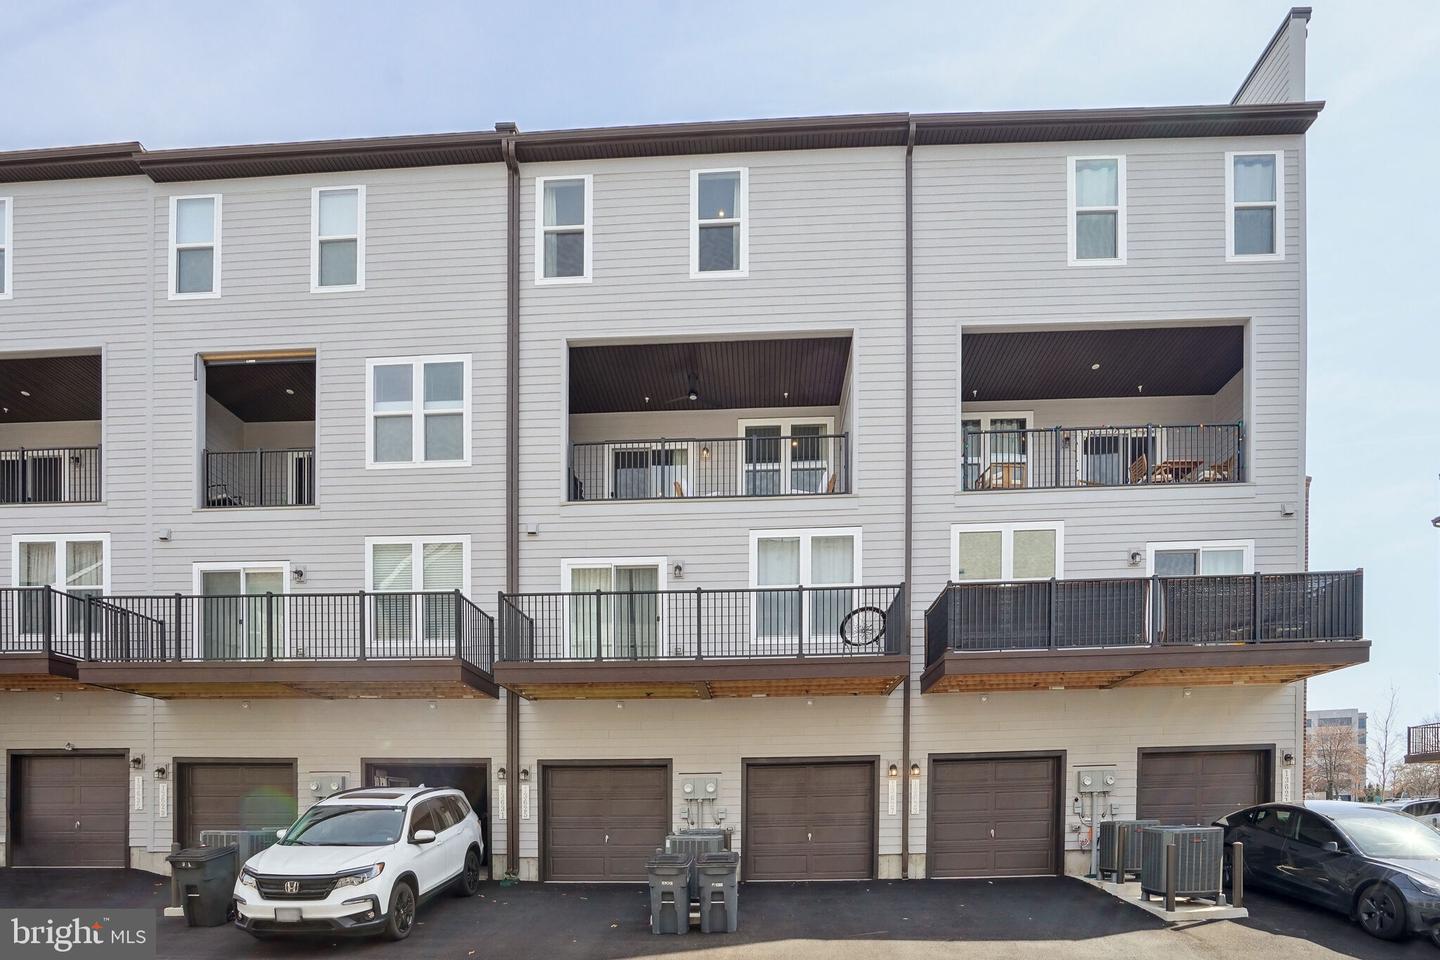 13627 DULLES TECHNOLOGY DR #152, HERNDON, Virginia 20171, 3 Bedrooms Bedrooms, ,2 BathroomsBathrooms,Residential,For sale,13627 DULLES TECHNOLOGY DR #152,VAFX2166348 MLS # VAFX2166348